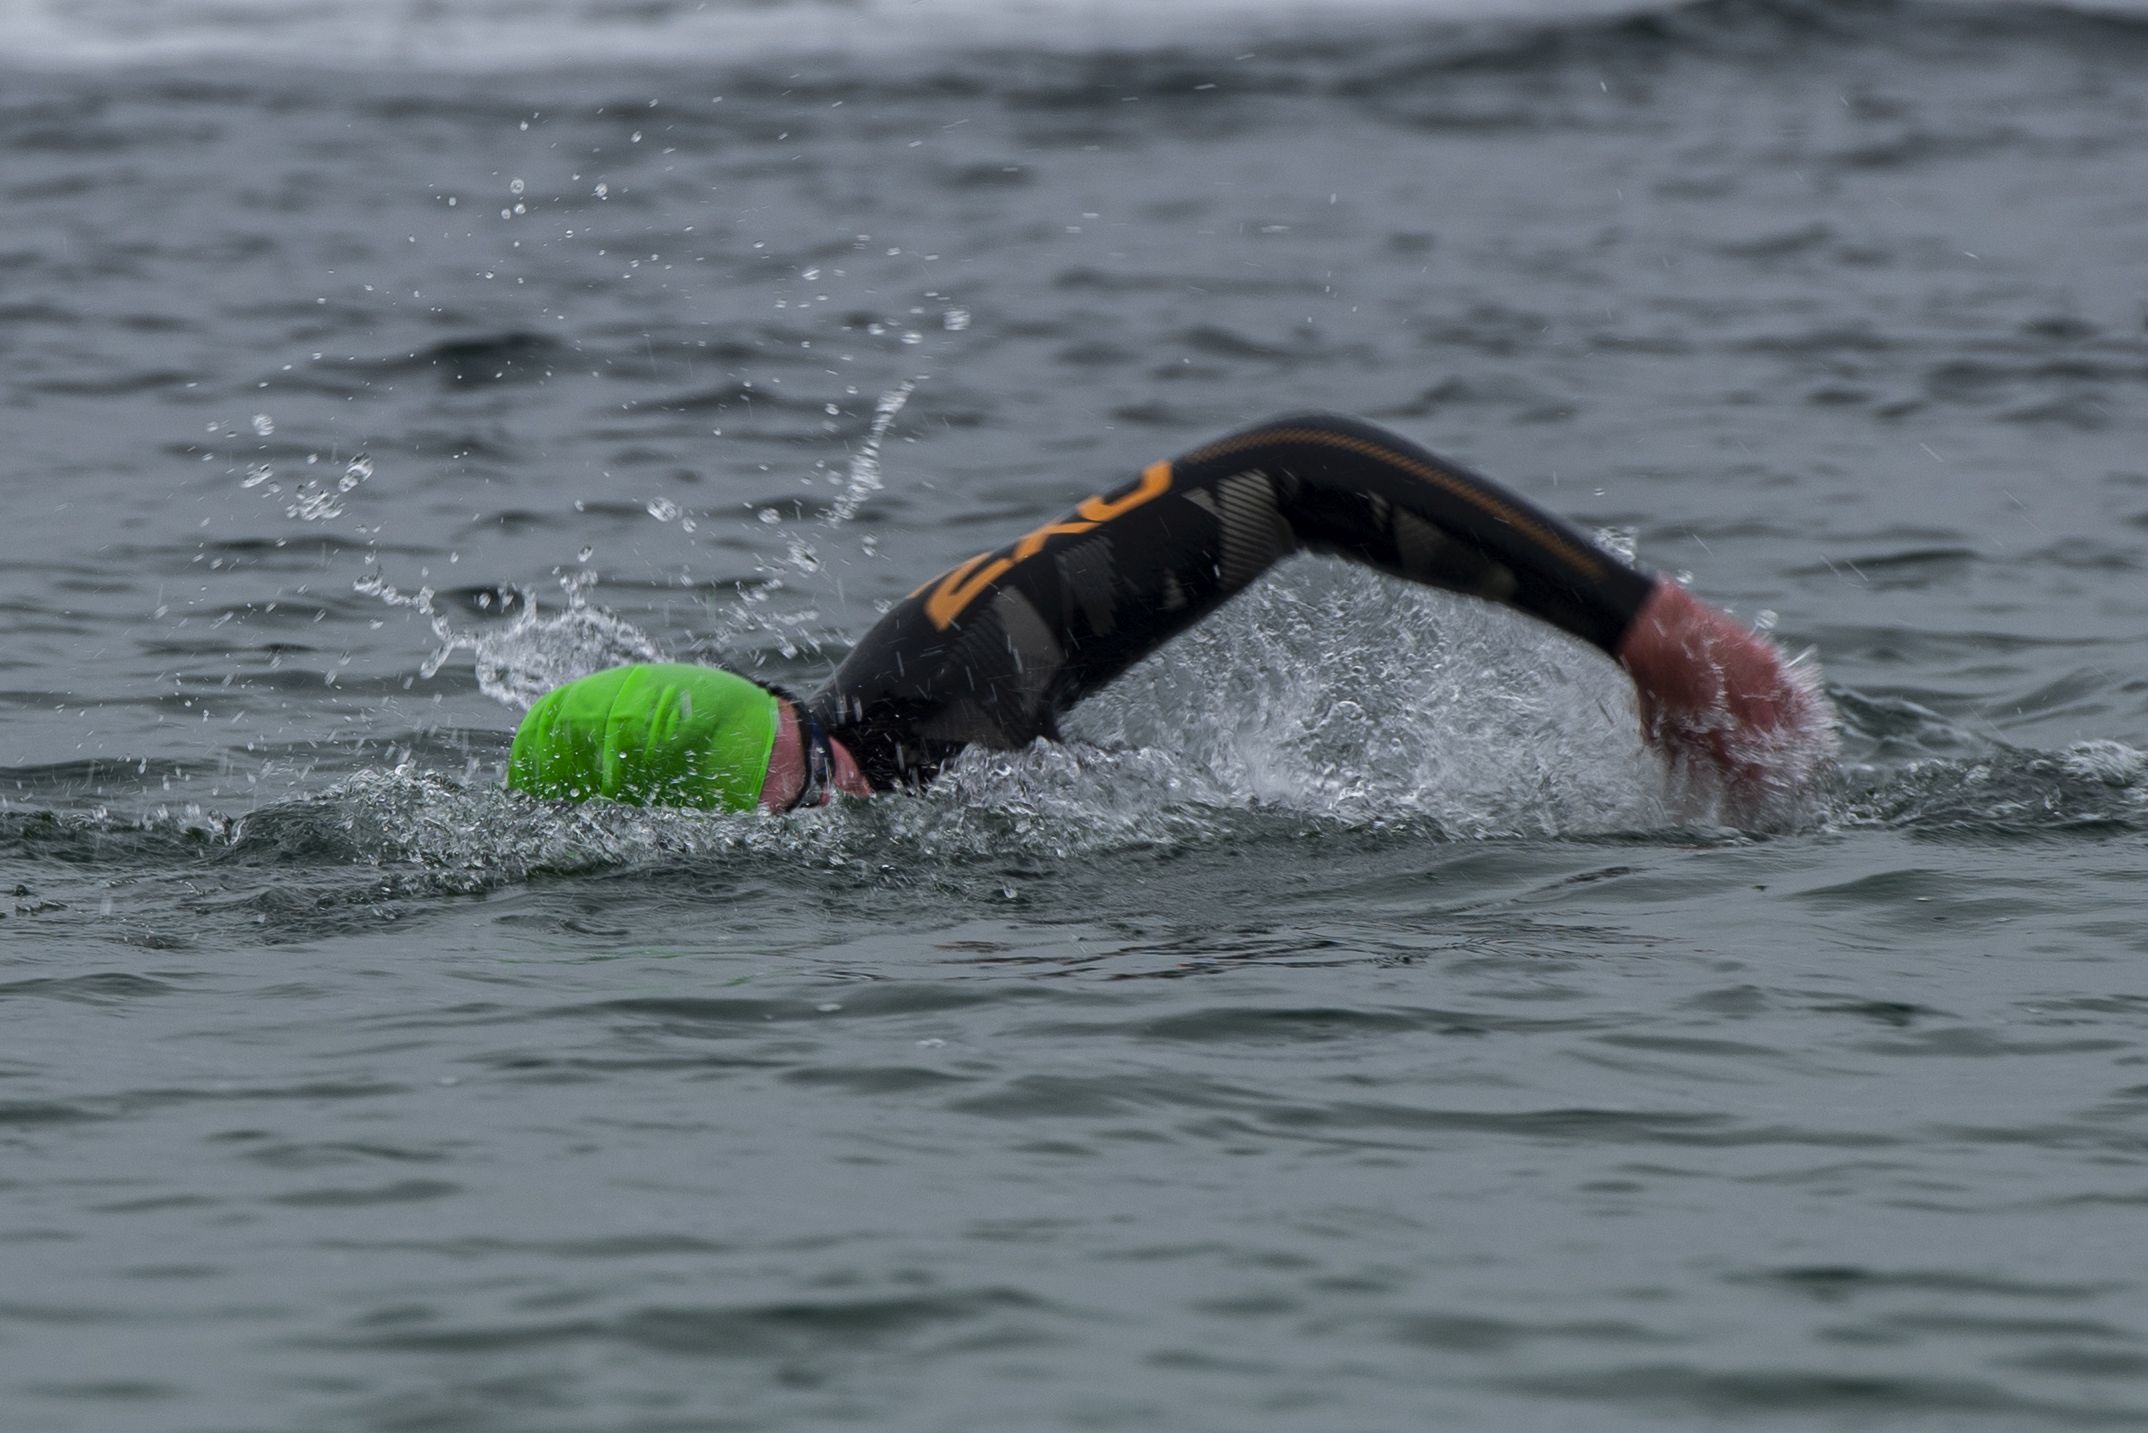 A swimmer slices through the water Picture: RNLI